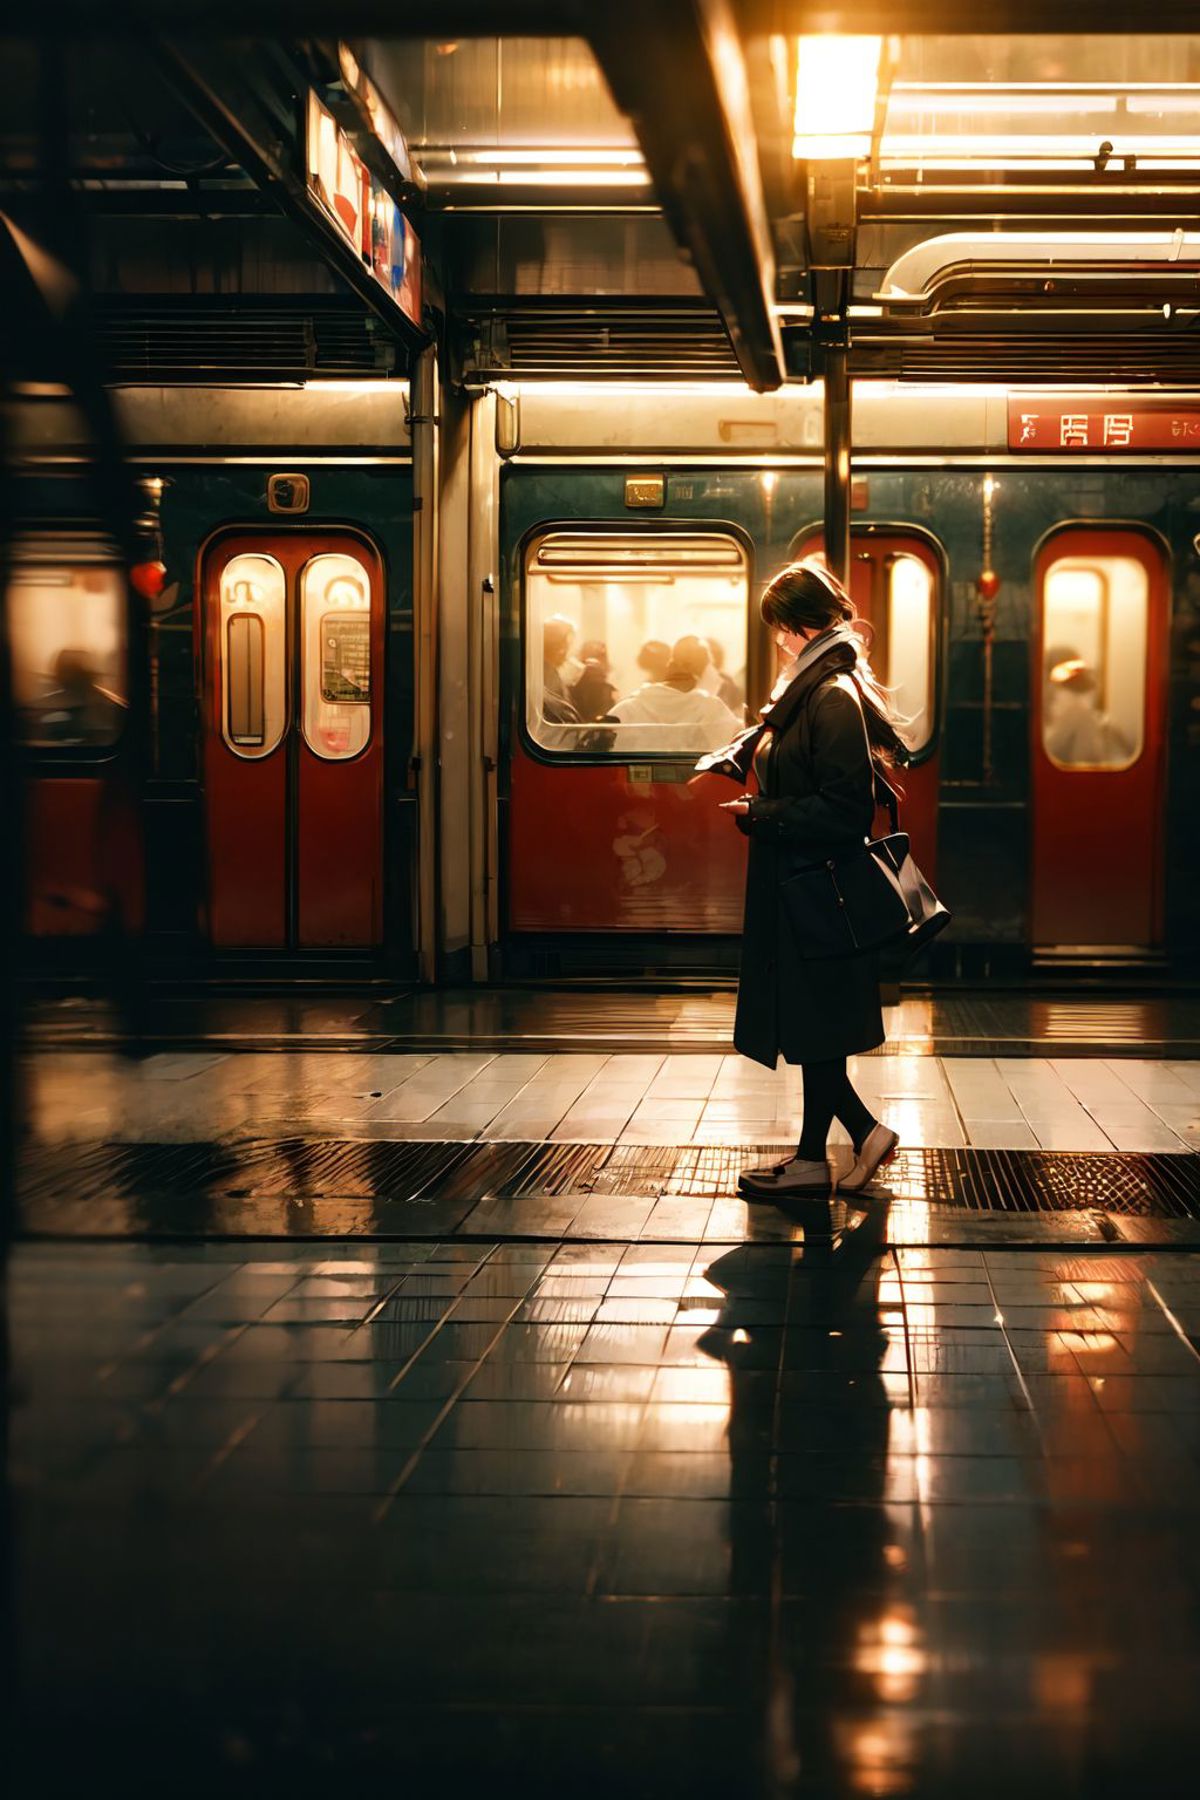 A woman standing on a train platform at night, looking at her phone.